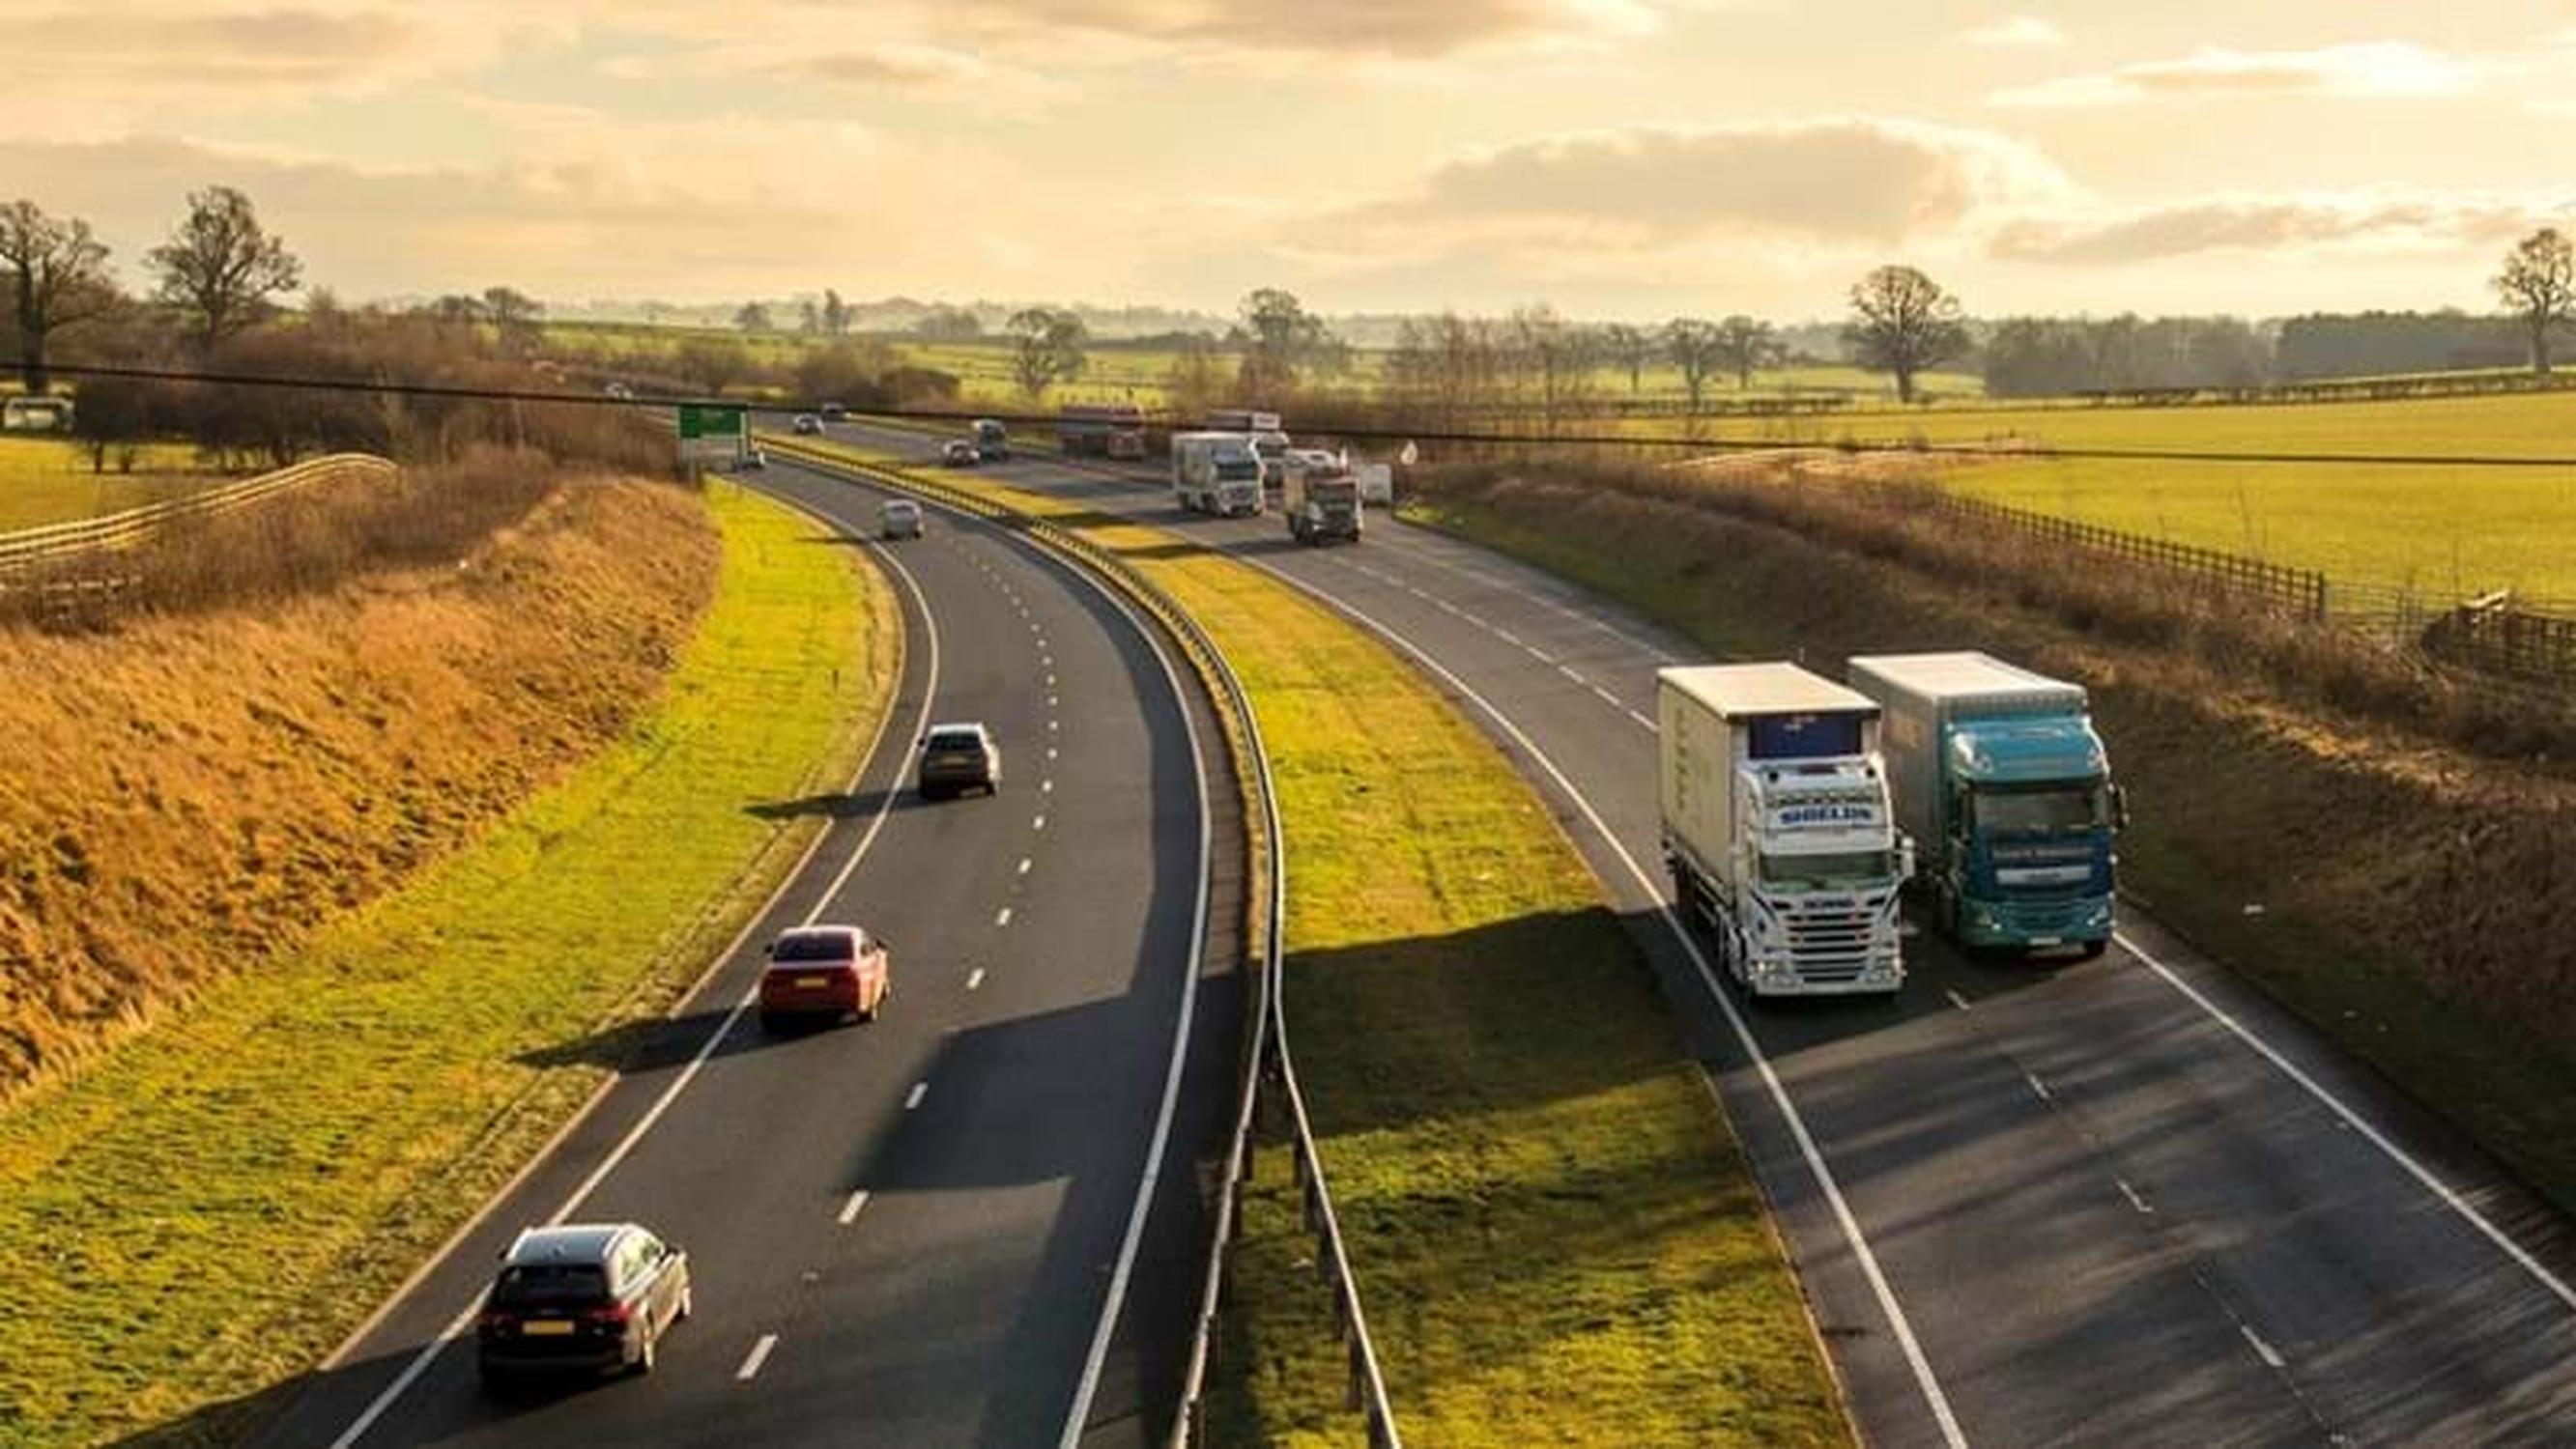 Transport Secretary Mark Harper has approved the scheme to dual the remaining 30km of single carriageway sections of the A66 between M6 (J40) at Penrith and the A1(M) (J53) at Scotch Corner